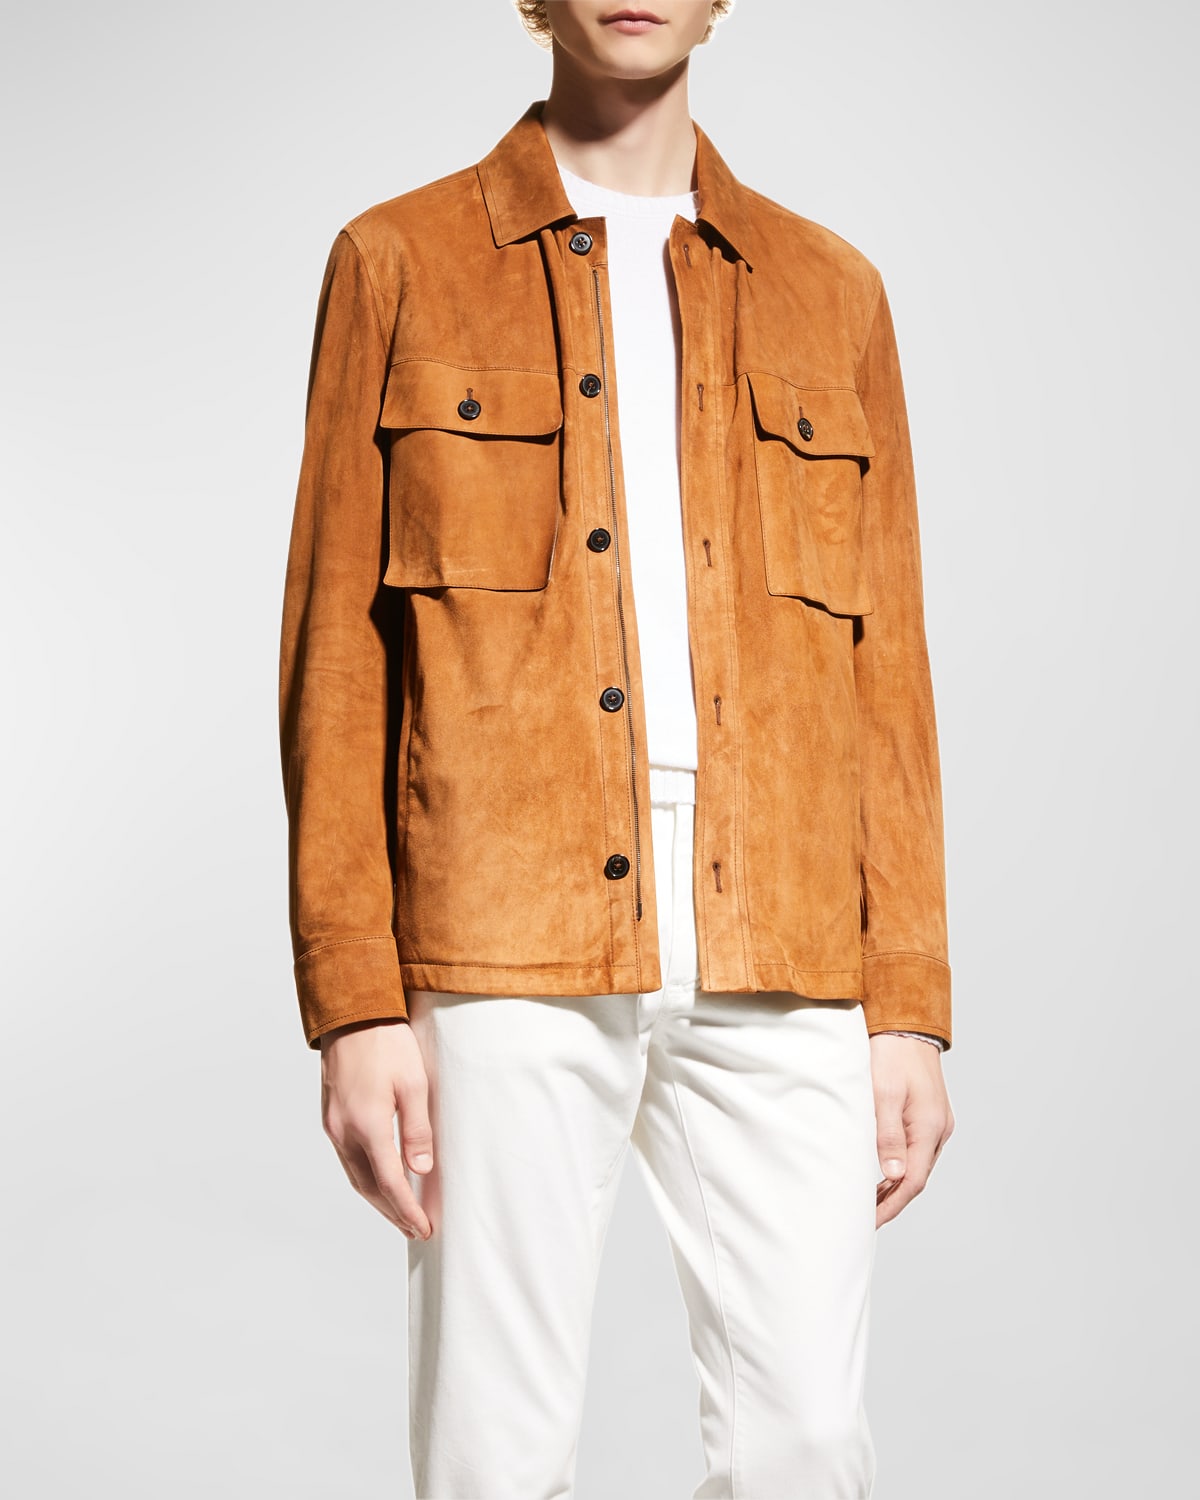 Zegna Men's Suede-leather Overshirt In Dk Brw Sld